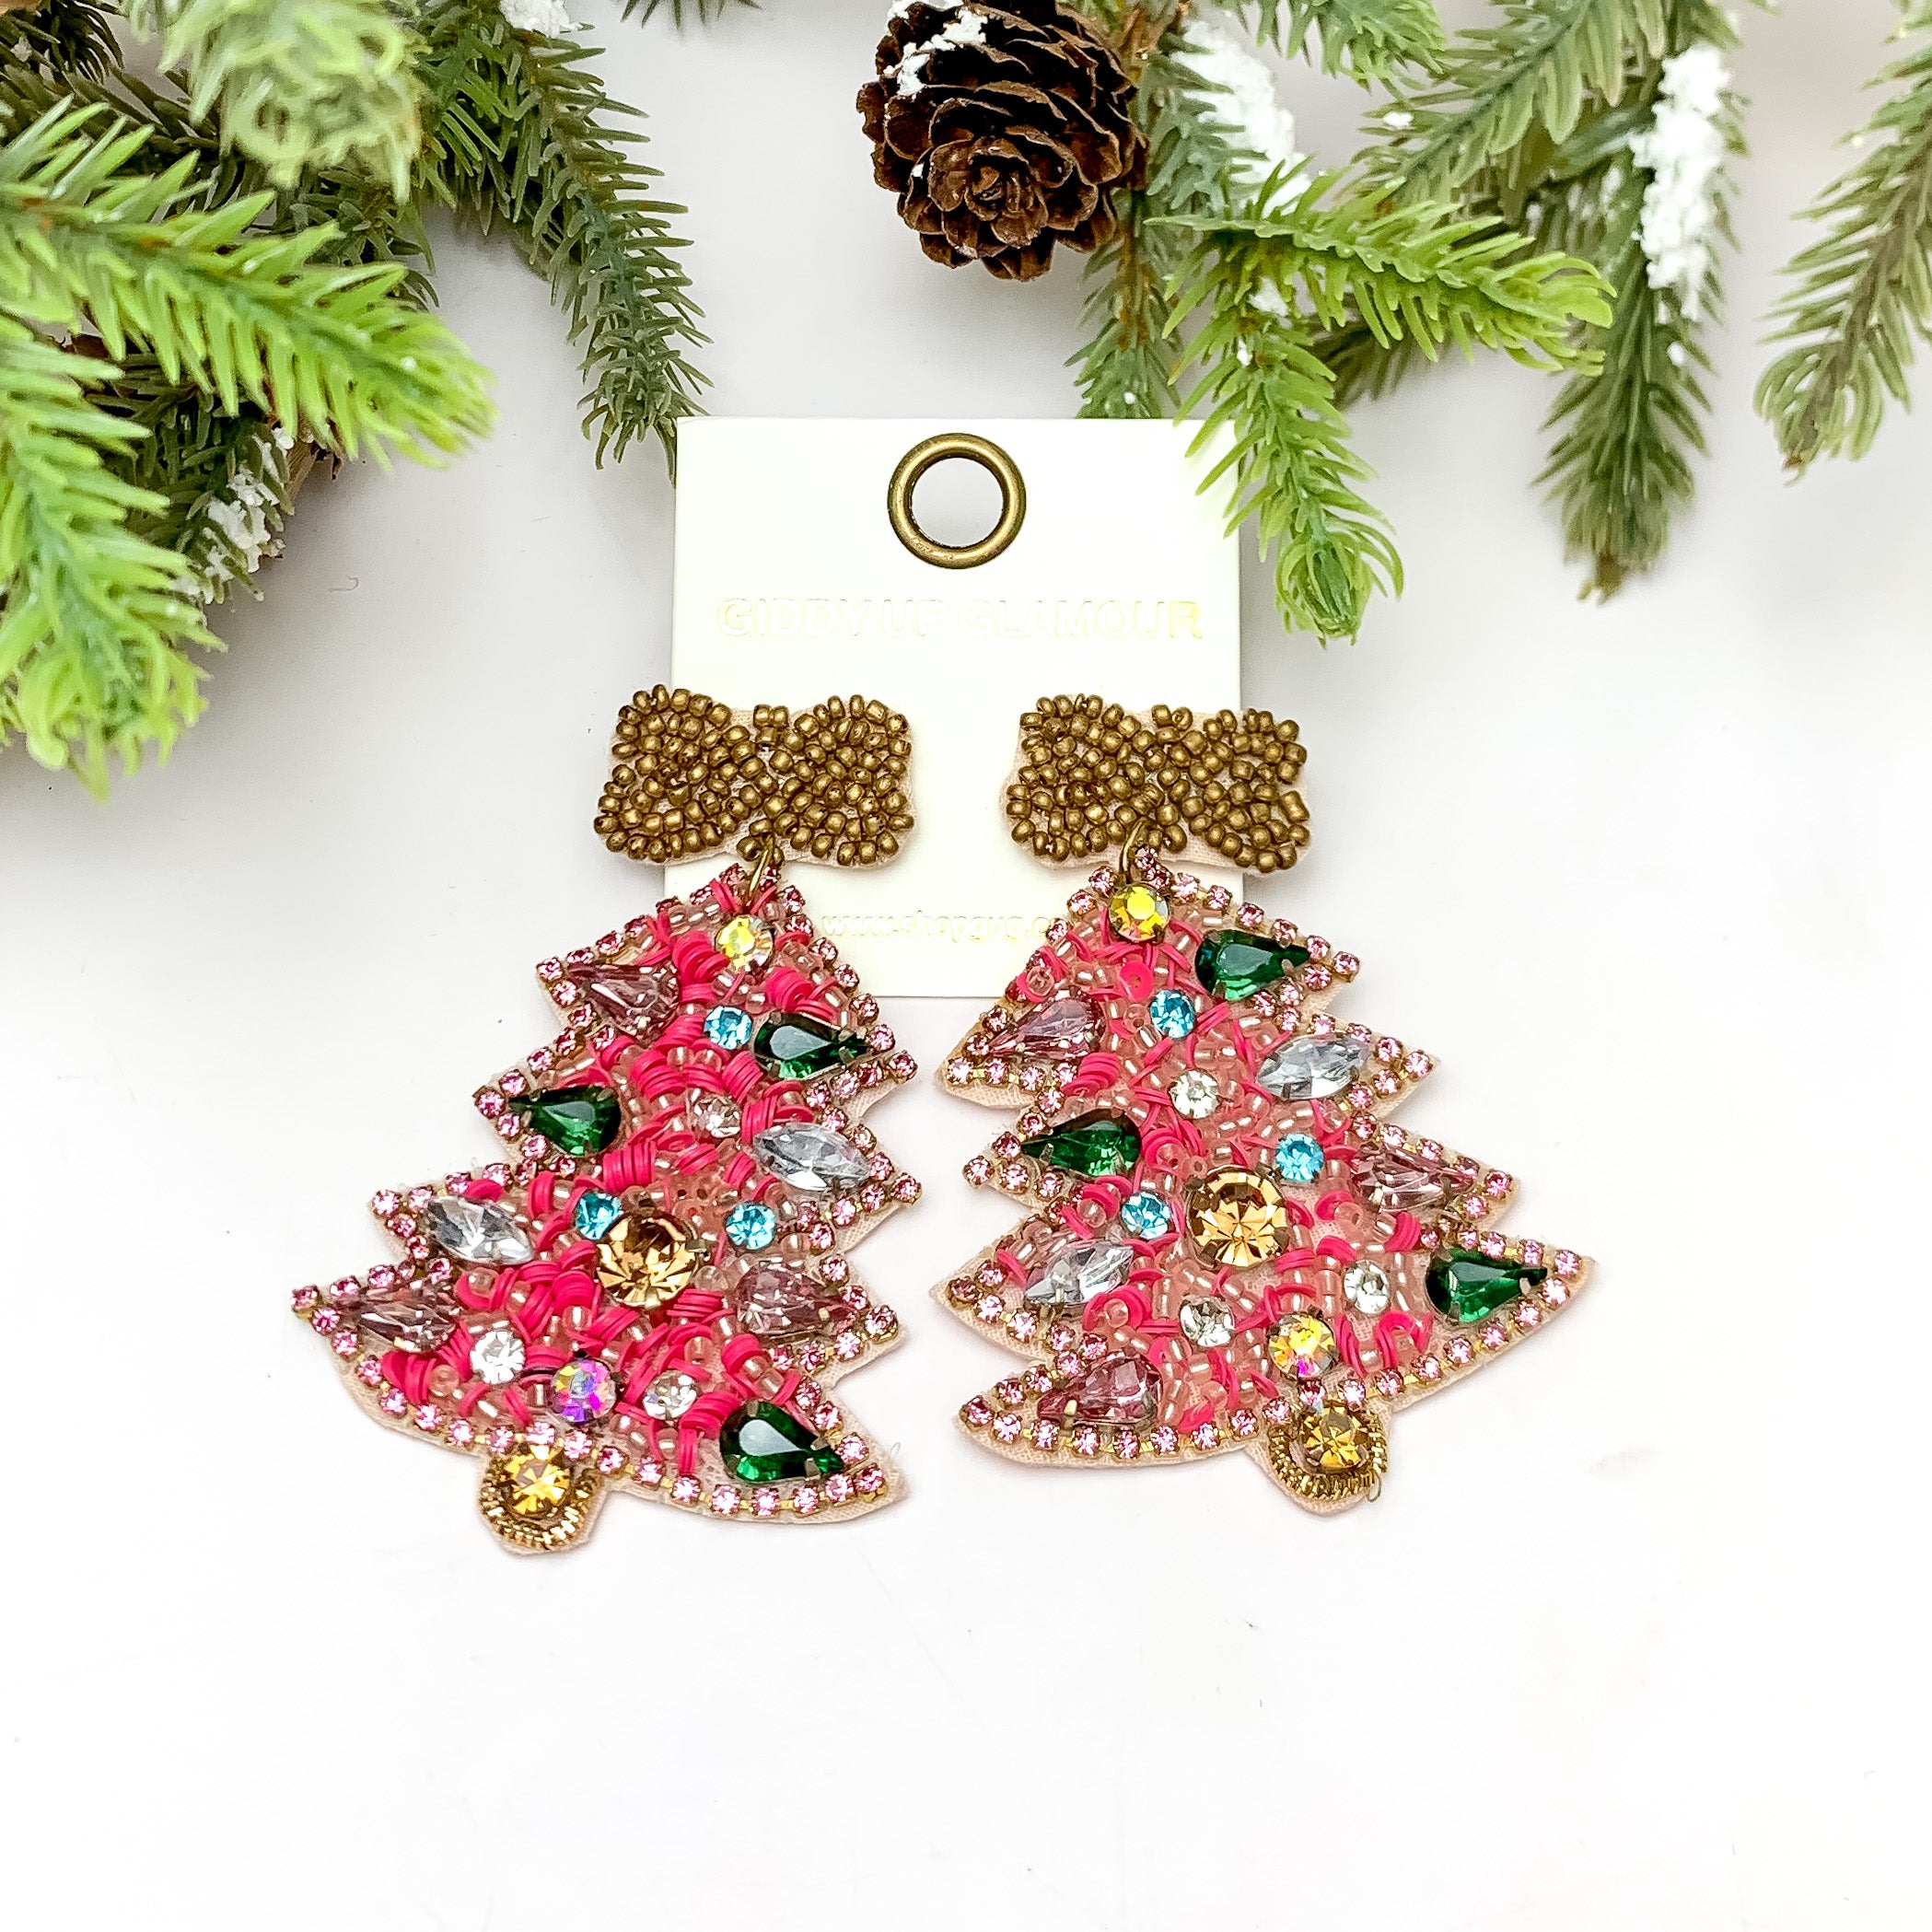 Multicolor Crystals and Pink Beaded Christmas Tree Earrings With a Gold Bow. These earrings are pictured on a white background with a tree and pine cones at the top.